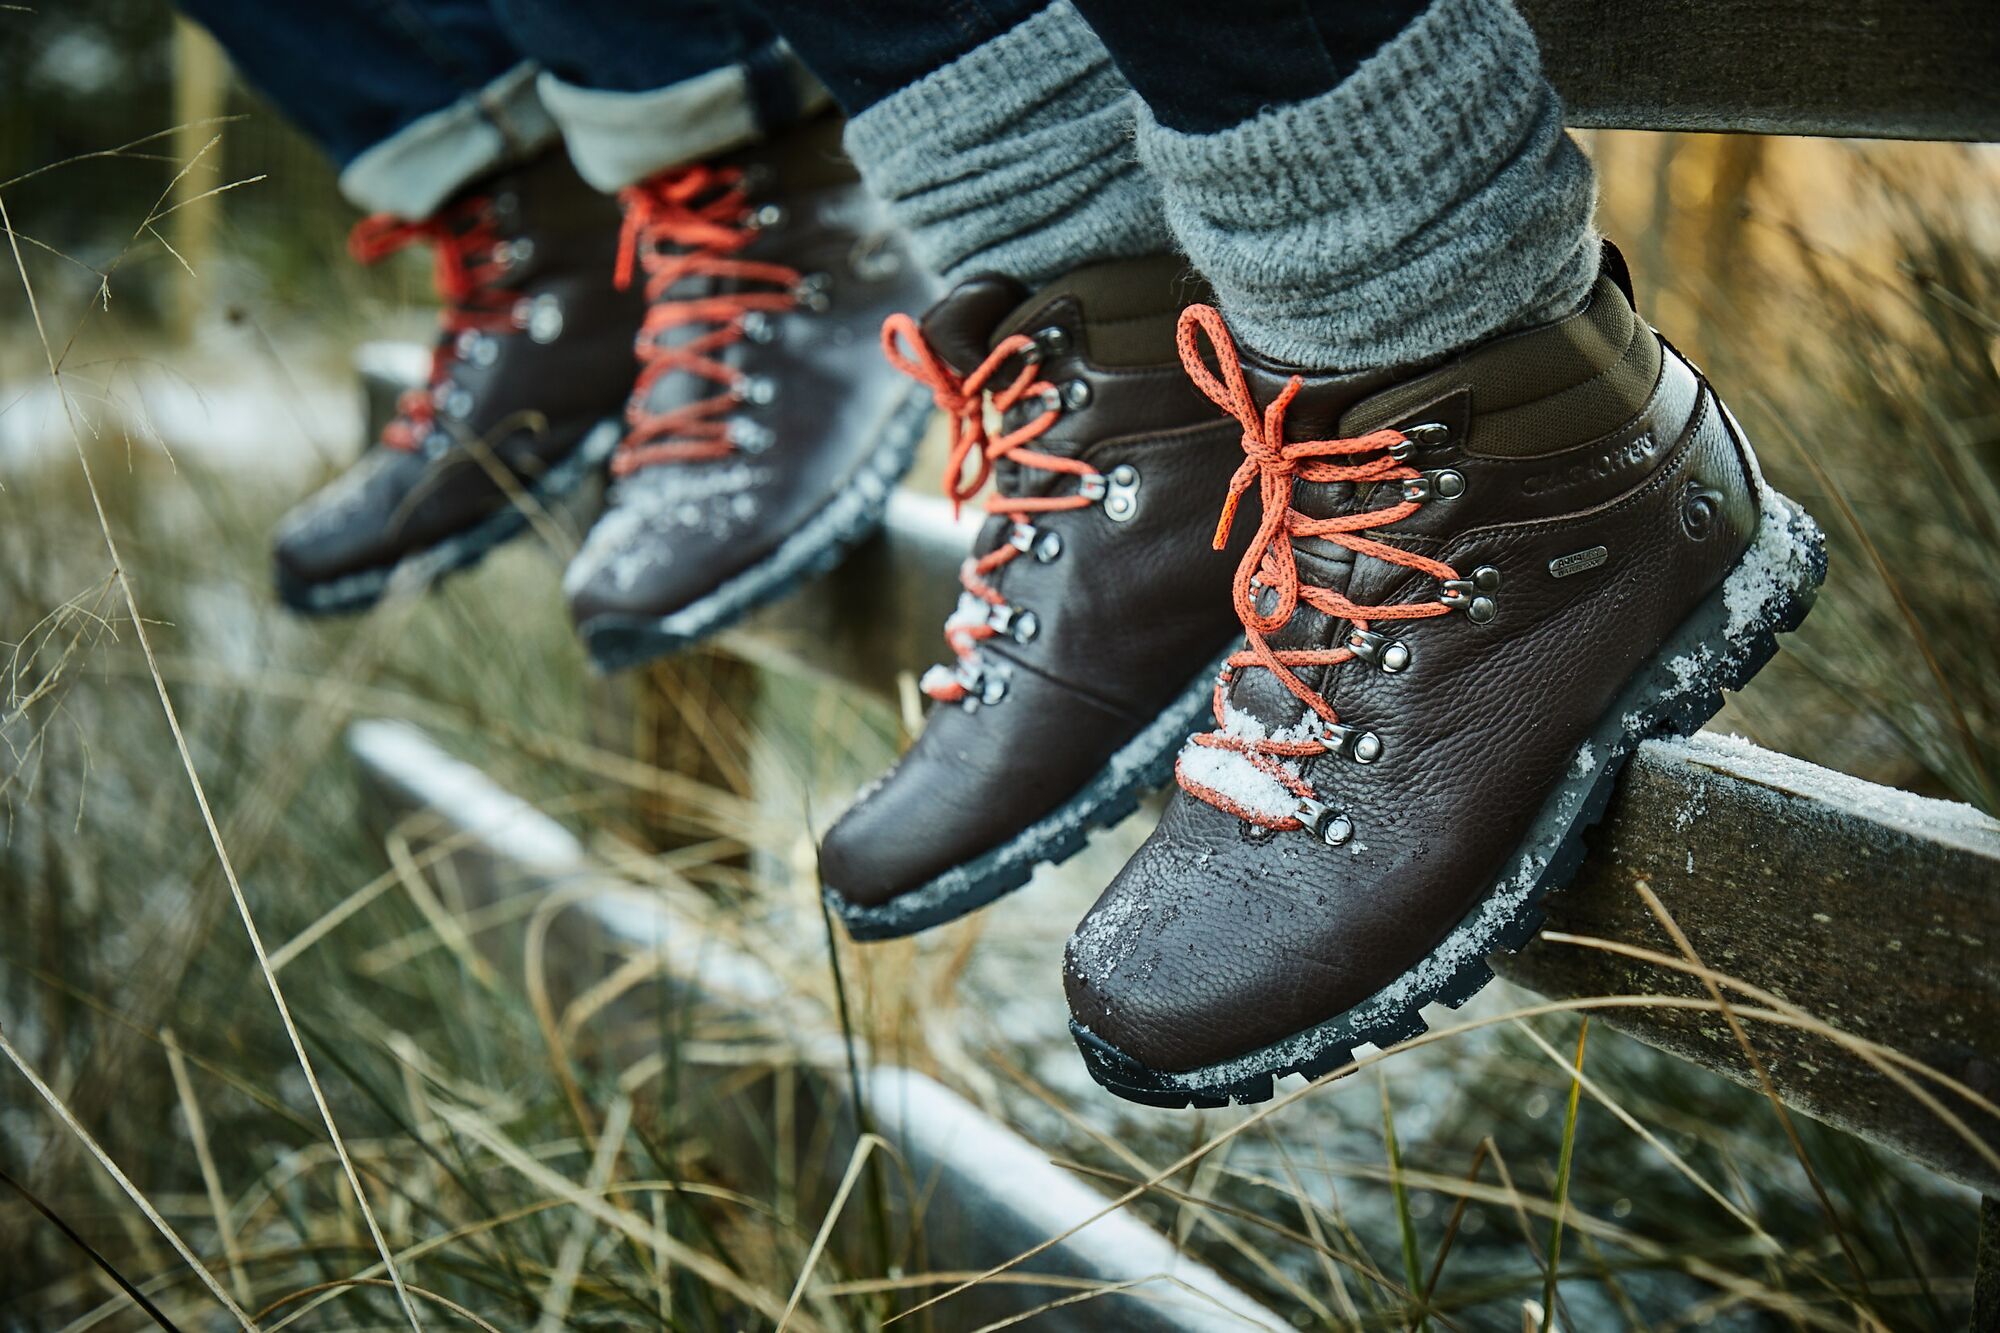 Looking after your favourite footwear | Craghoppers